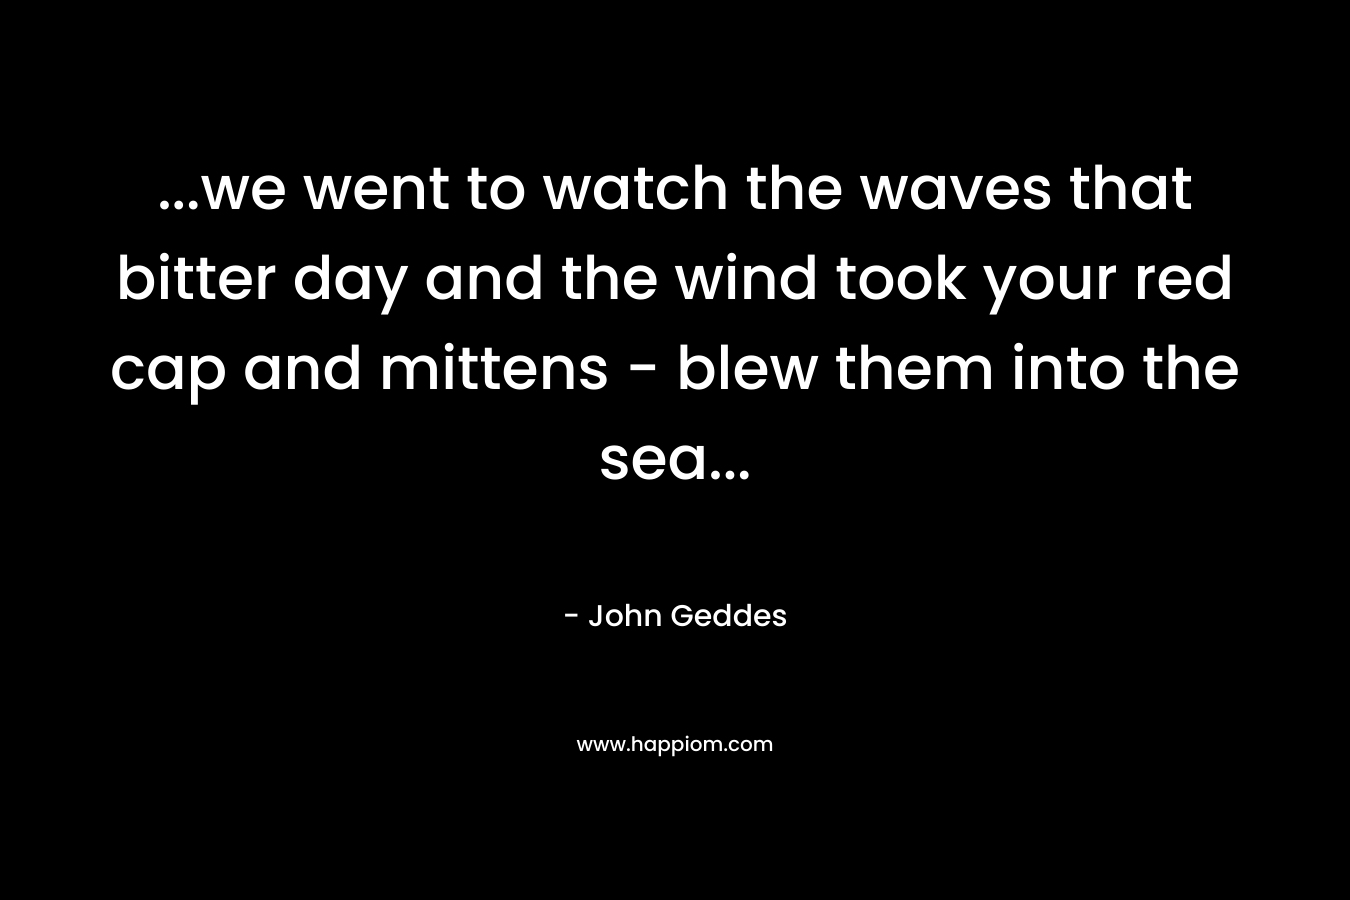 …we went to watch the waves that bitter day and the wind took your red cap and mittens – blew them into the sea… – John Geddes